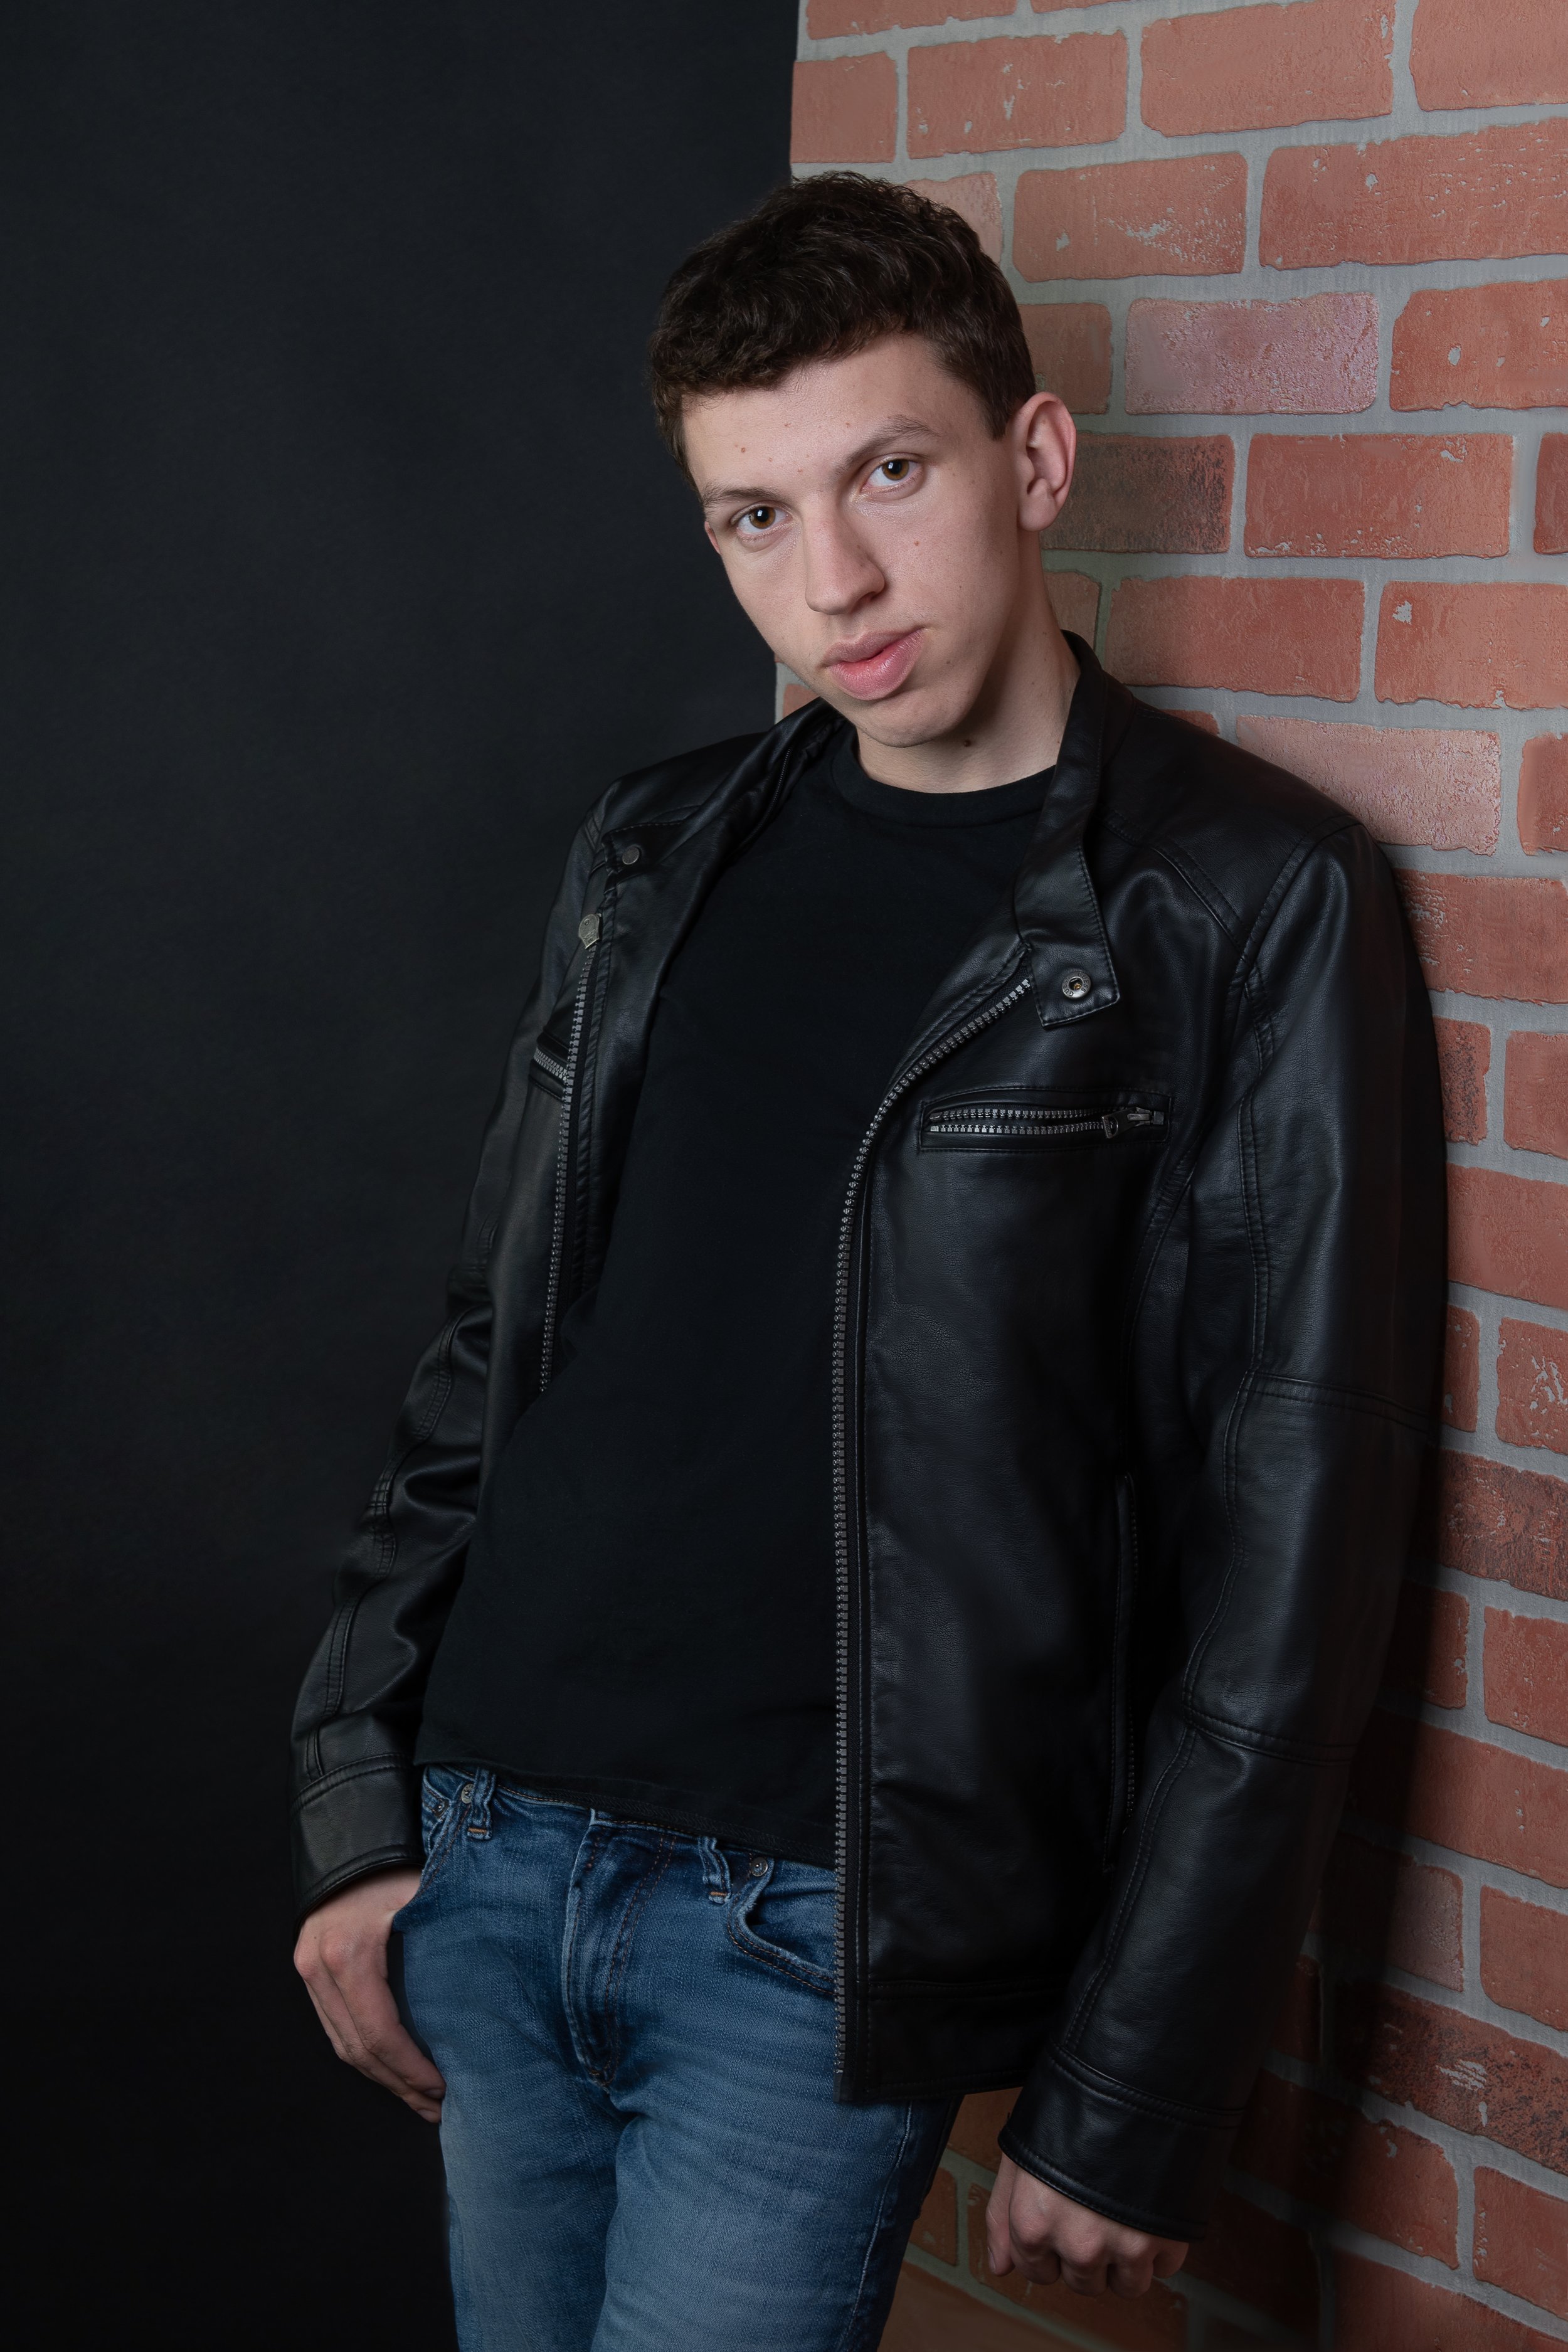 Teen Guy Leather Jacket leaning against brick wall headshot session (Copy)